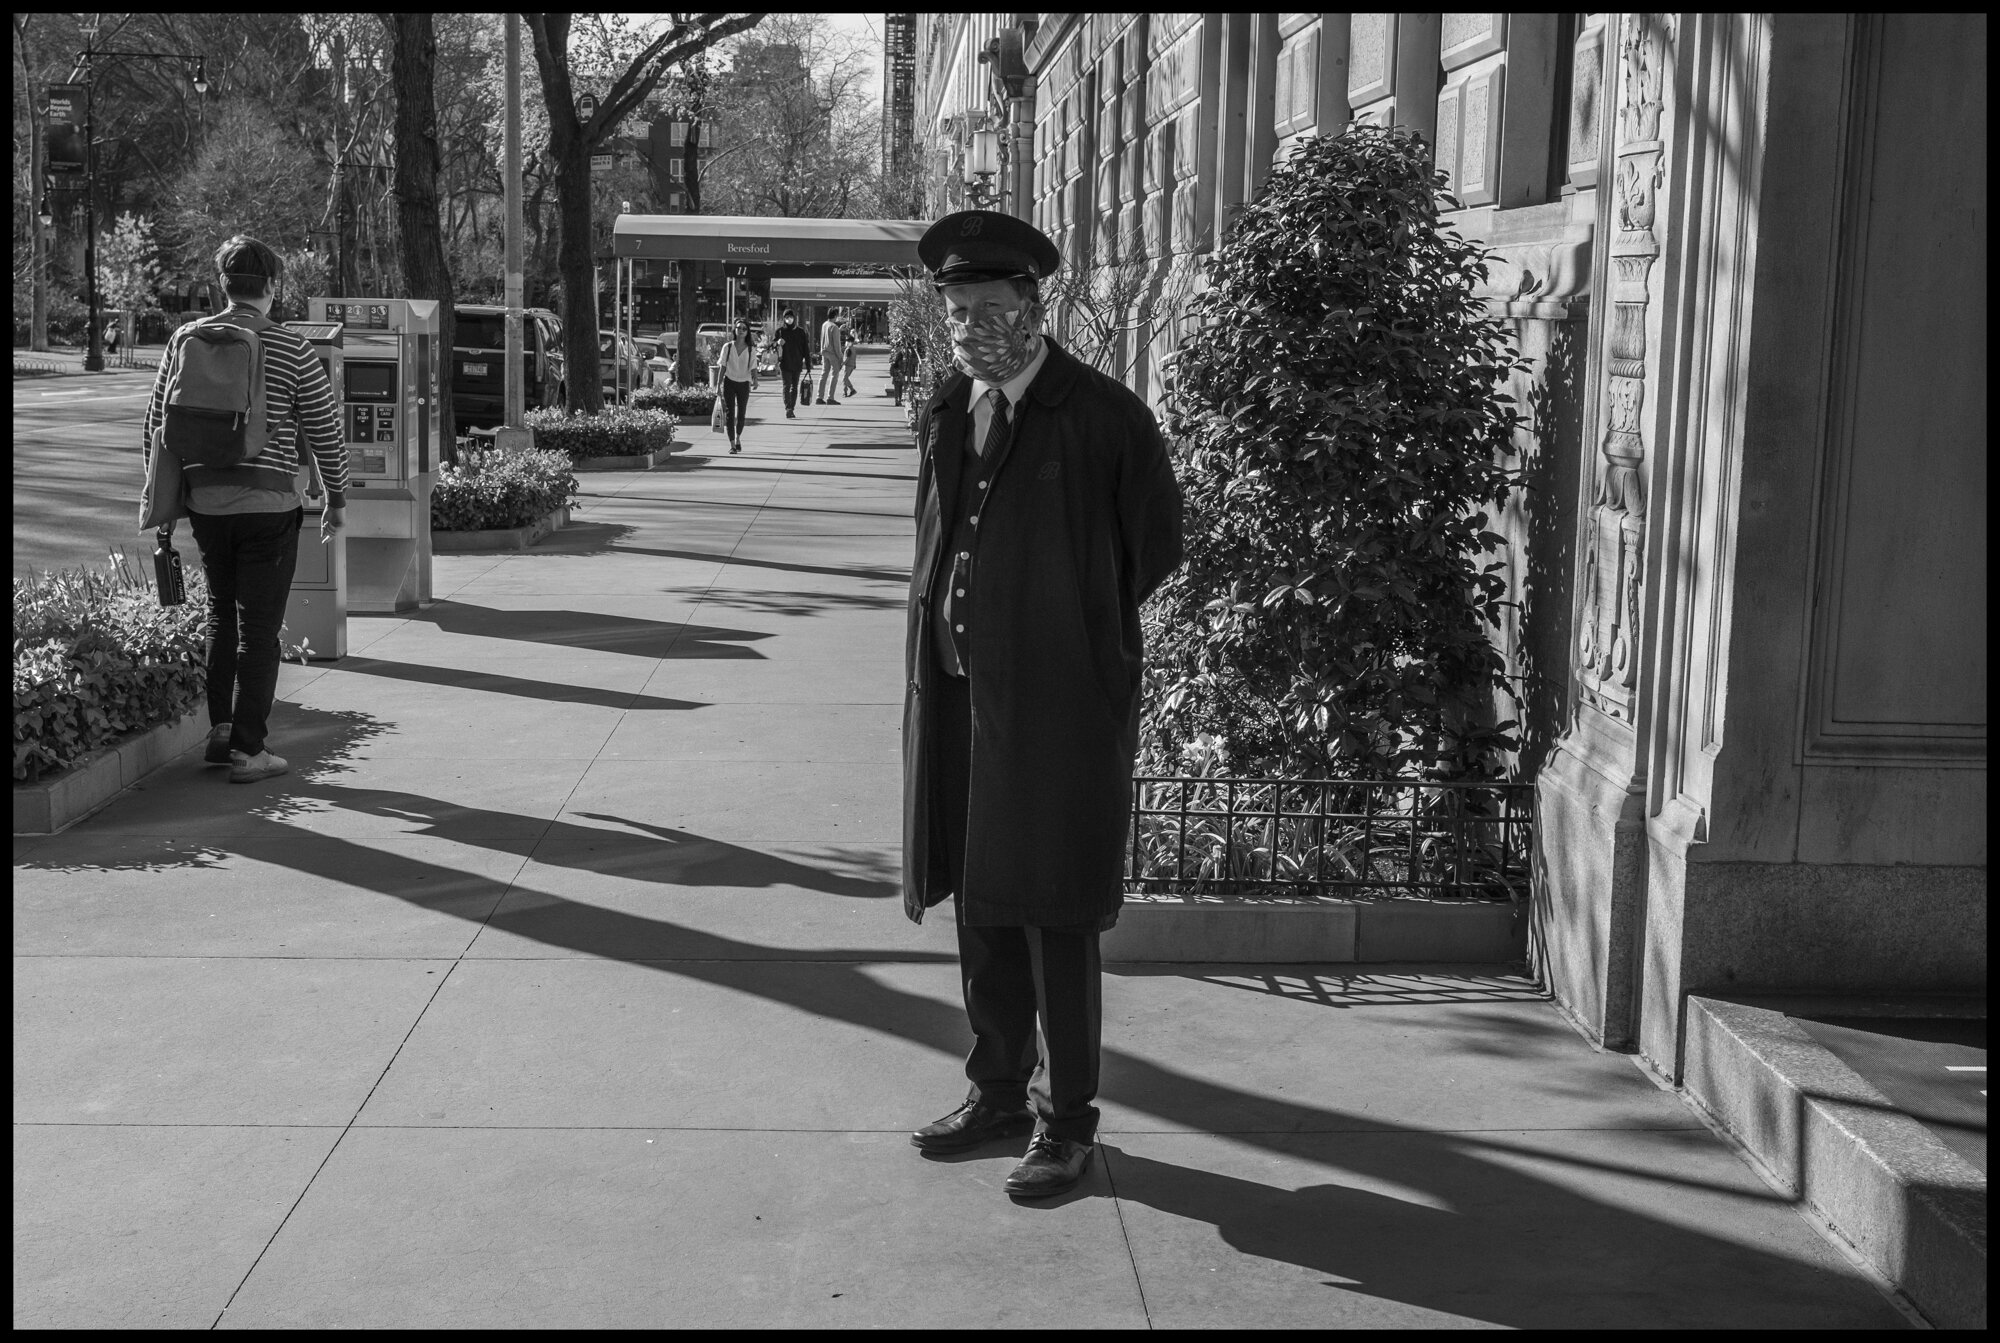  Tom is a doorman at a building near Central Park on the Upper Westside.  April 6, 2020. © Peter Turnley  ID#&nbsp;14-013 